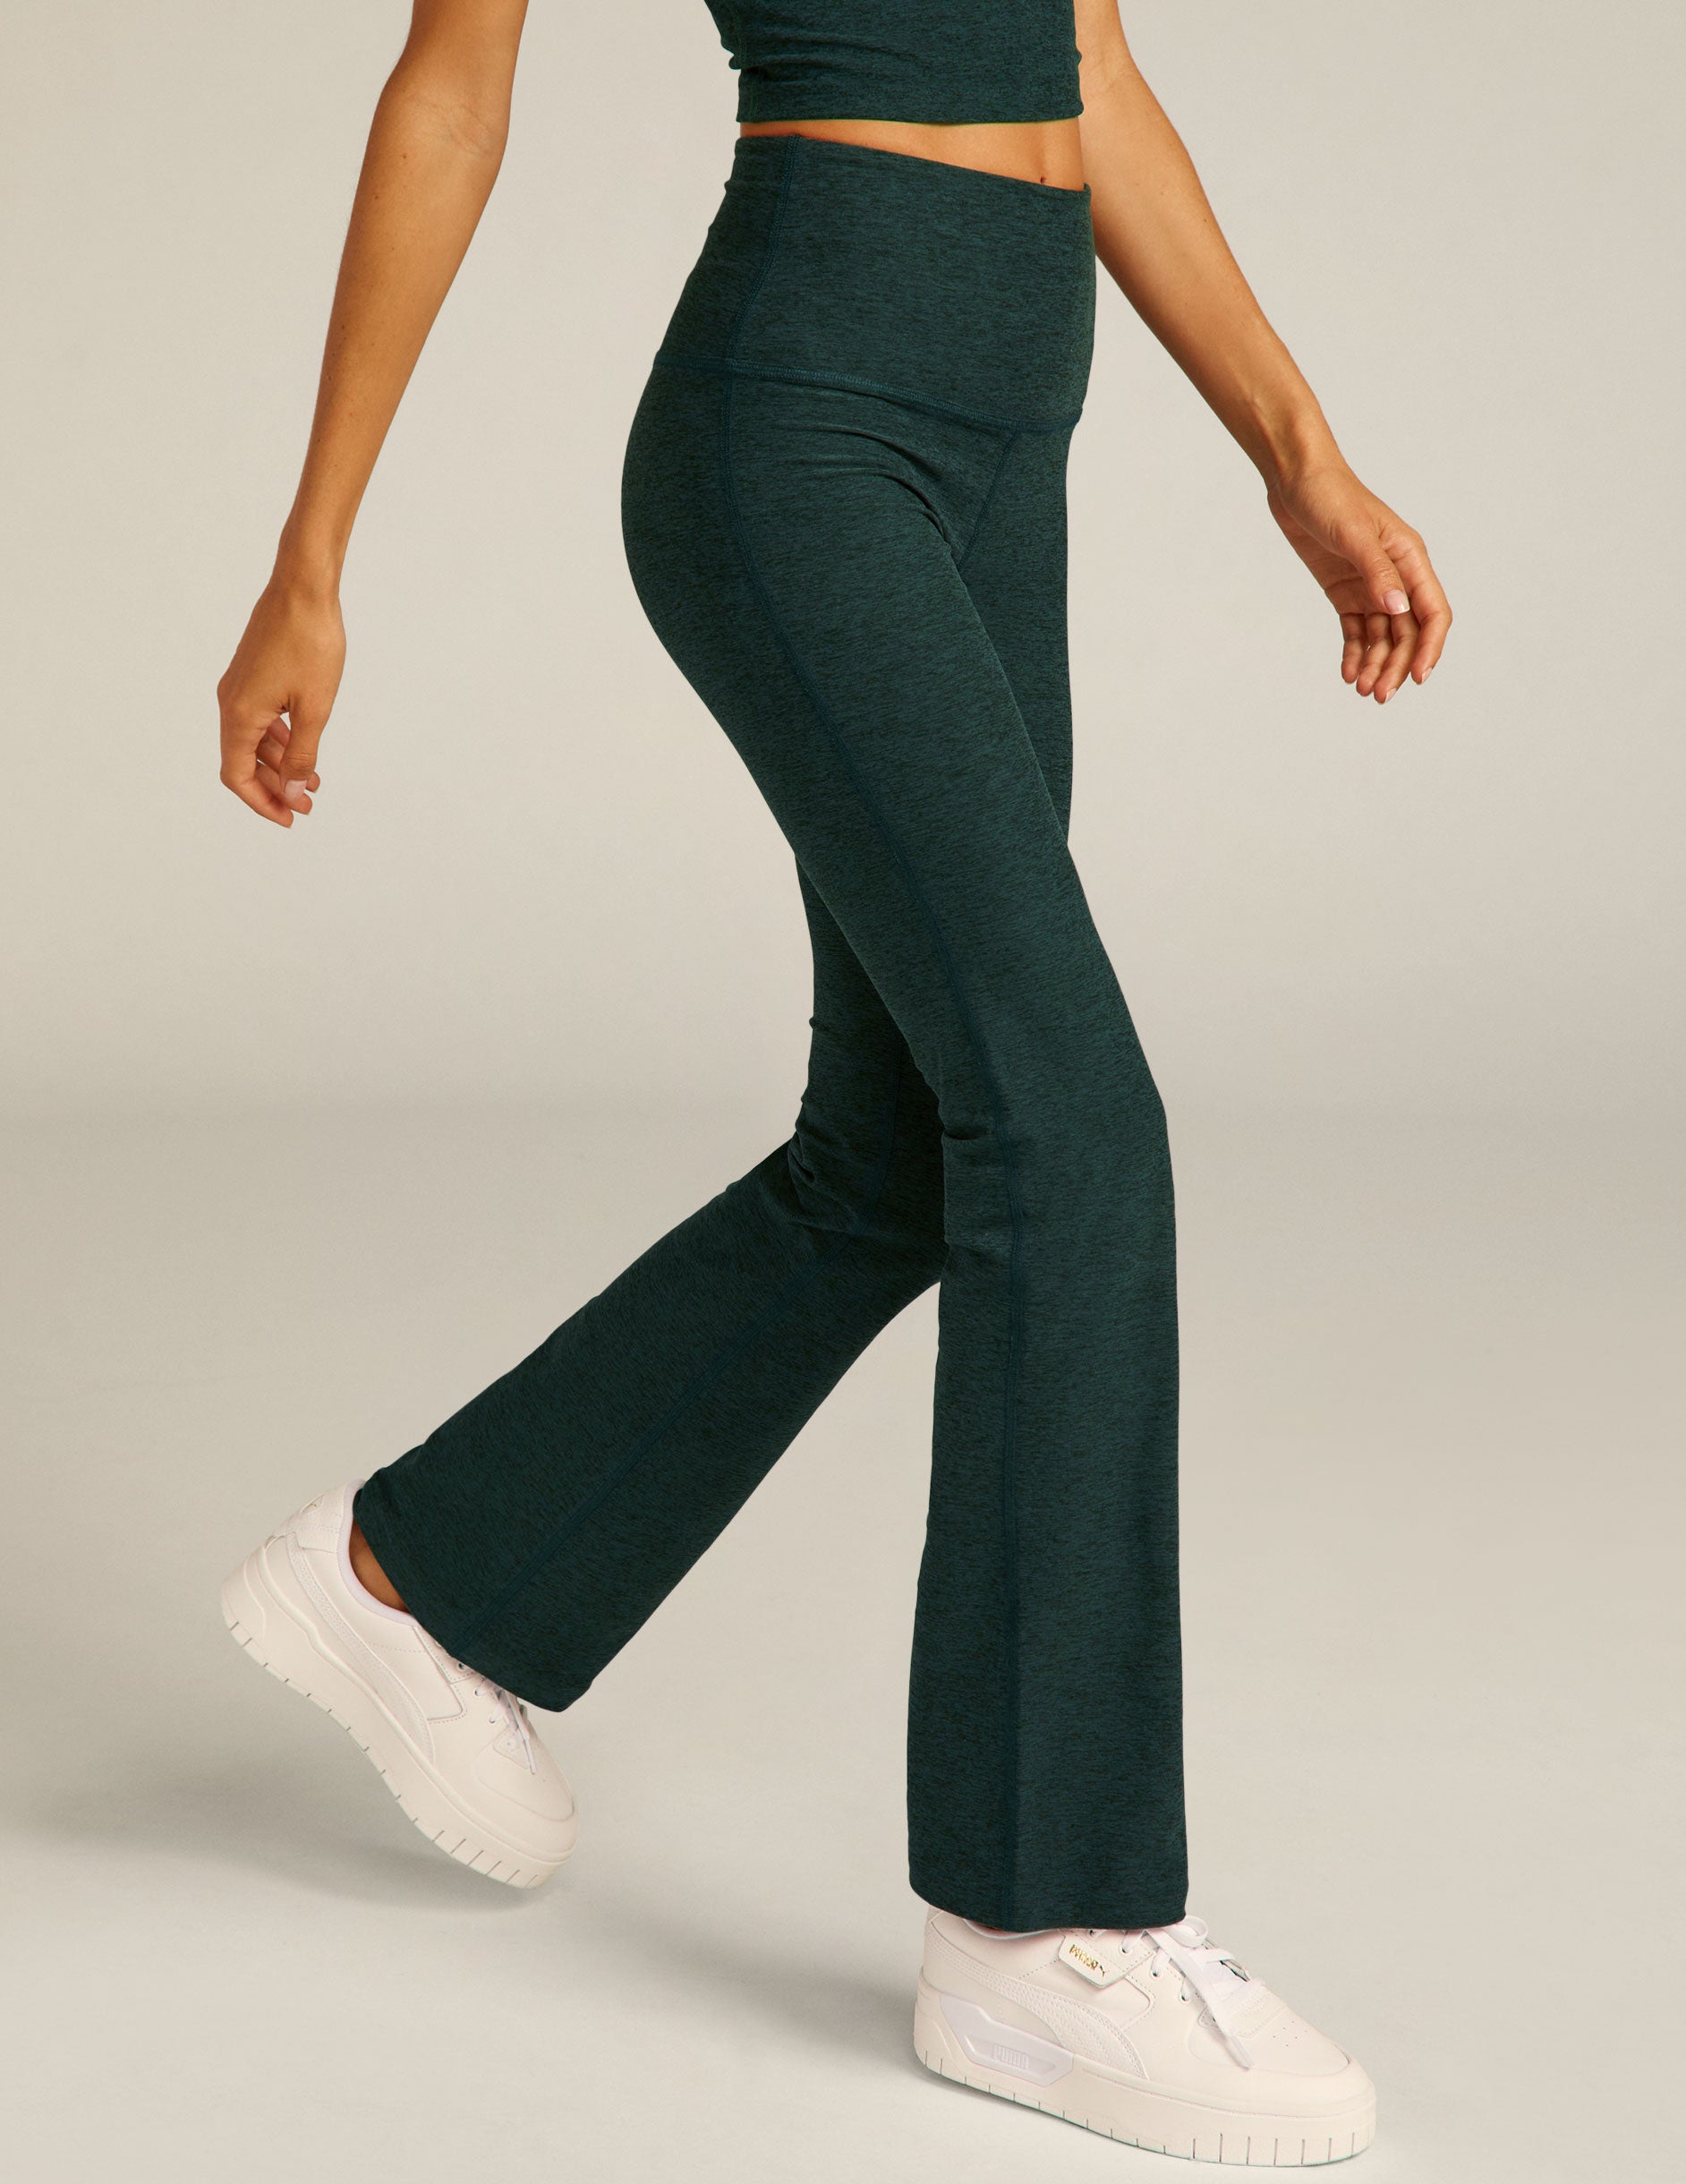 Beyond Yoga High Waisted Practice Pant  Urban Outfitters Mexico -  Clothing, Music, Home & Accessories